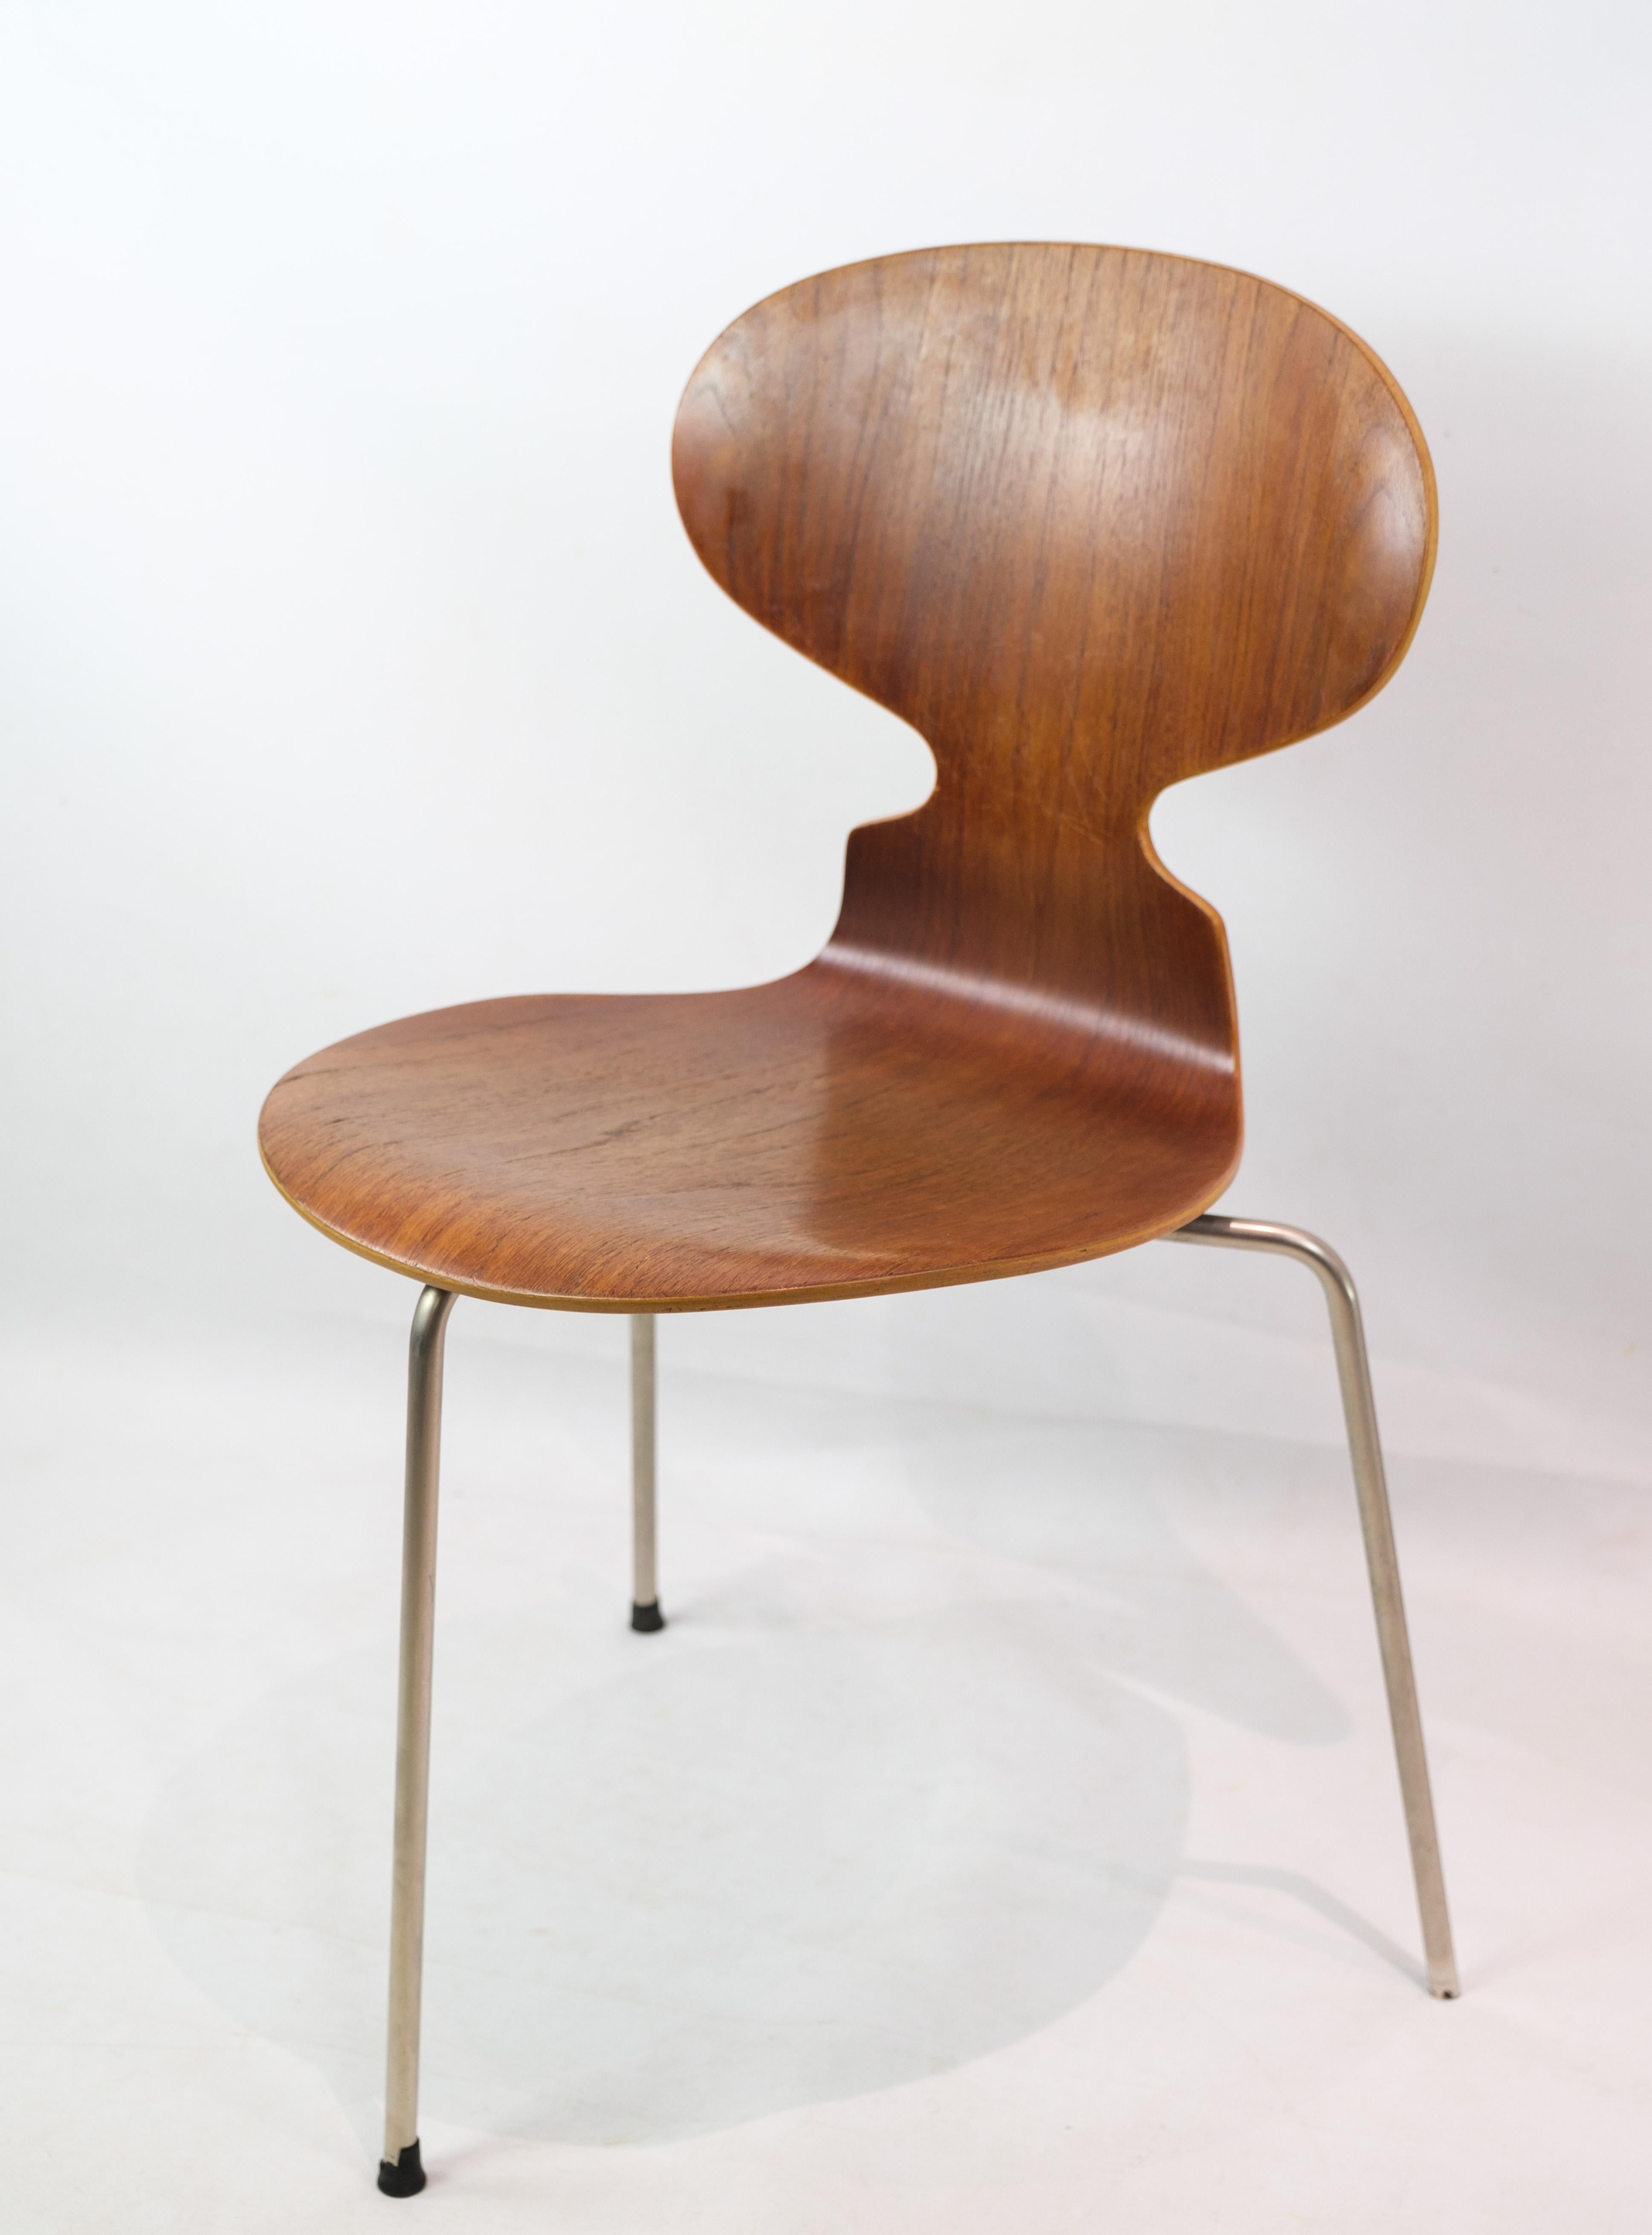 The ant, model 3100, designed by Arne Jacobsen (1902-1971) in teak wood, manufactured by Fritz Hansen. This chair has three metal legs and is a very early model, due to the metal bracket at the bottom. Appears in very good used condition.

This